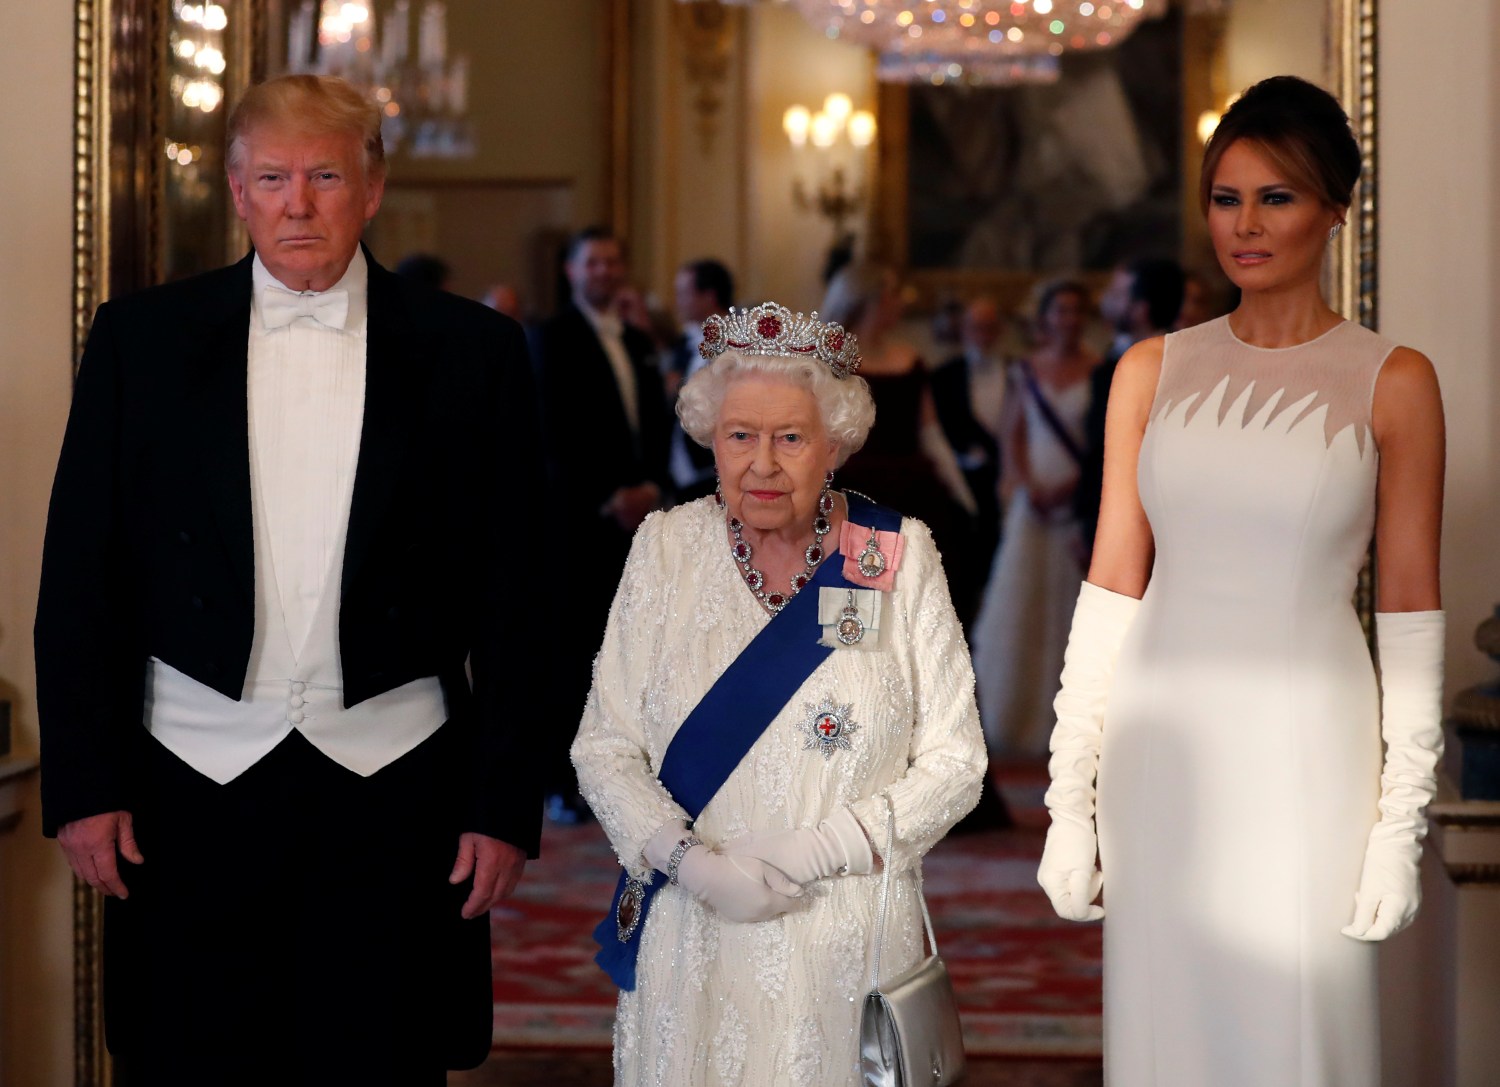 U.S. President Donald Trump, First Lady Melania Trump and Britain's Queen Elizabeth pose at the State Banquet at Buckingham Palace in London, Britain June 3, 2019. Alastair Grant/Pool via REUTERS - RC19A2509000